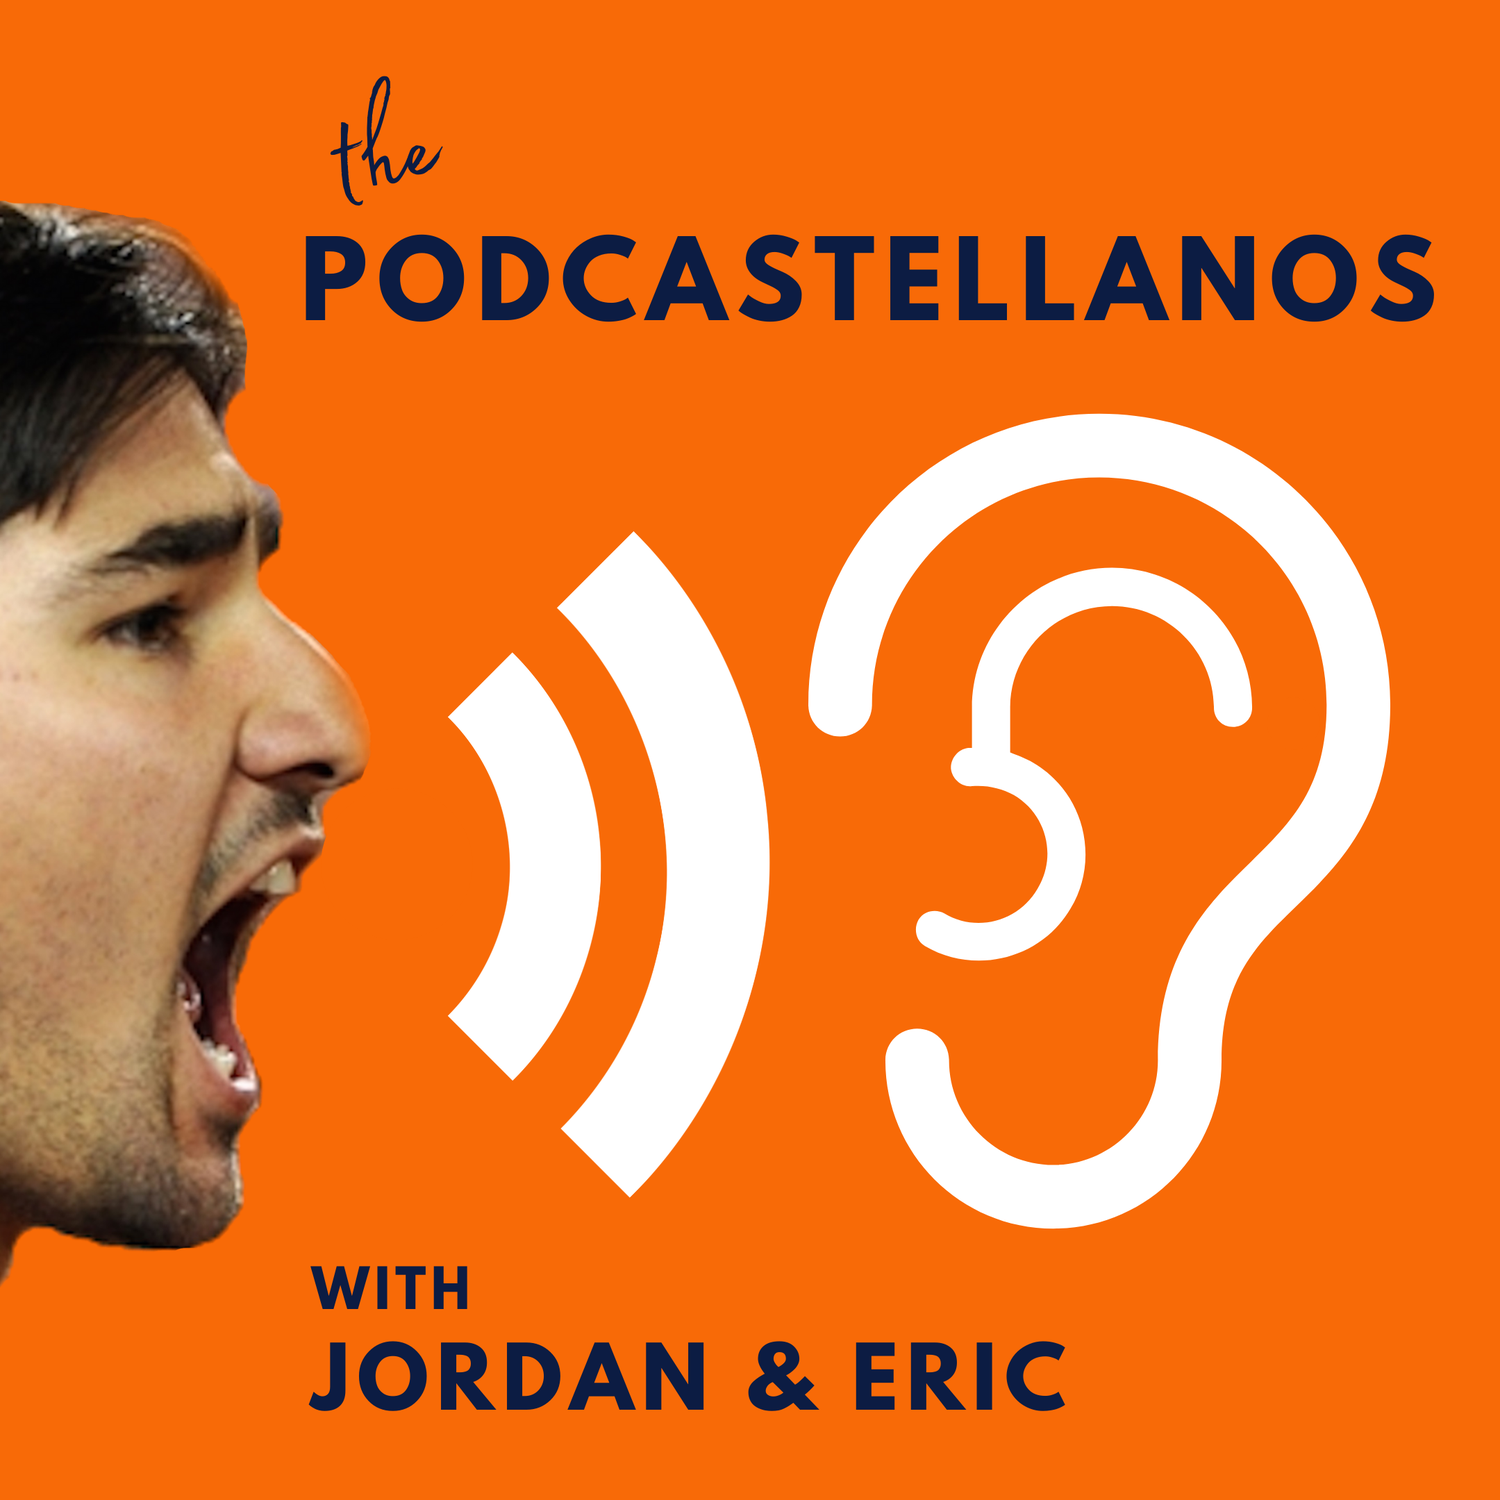 The Podcastellanos: Detroit Tigers Podcast podcast show image